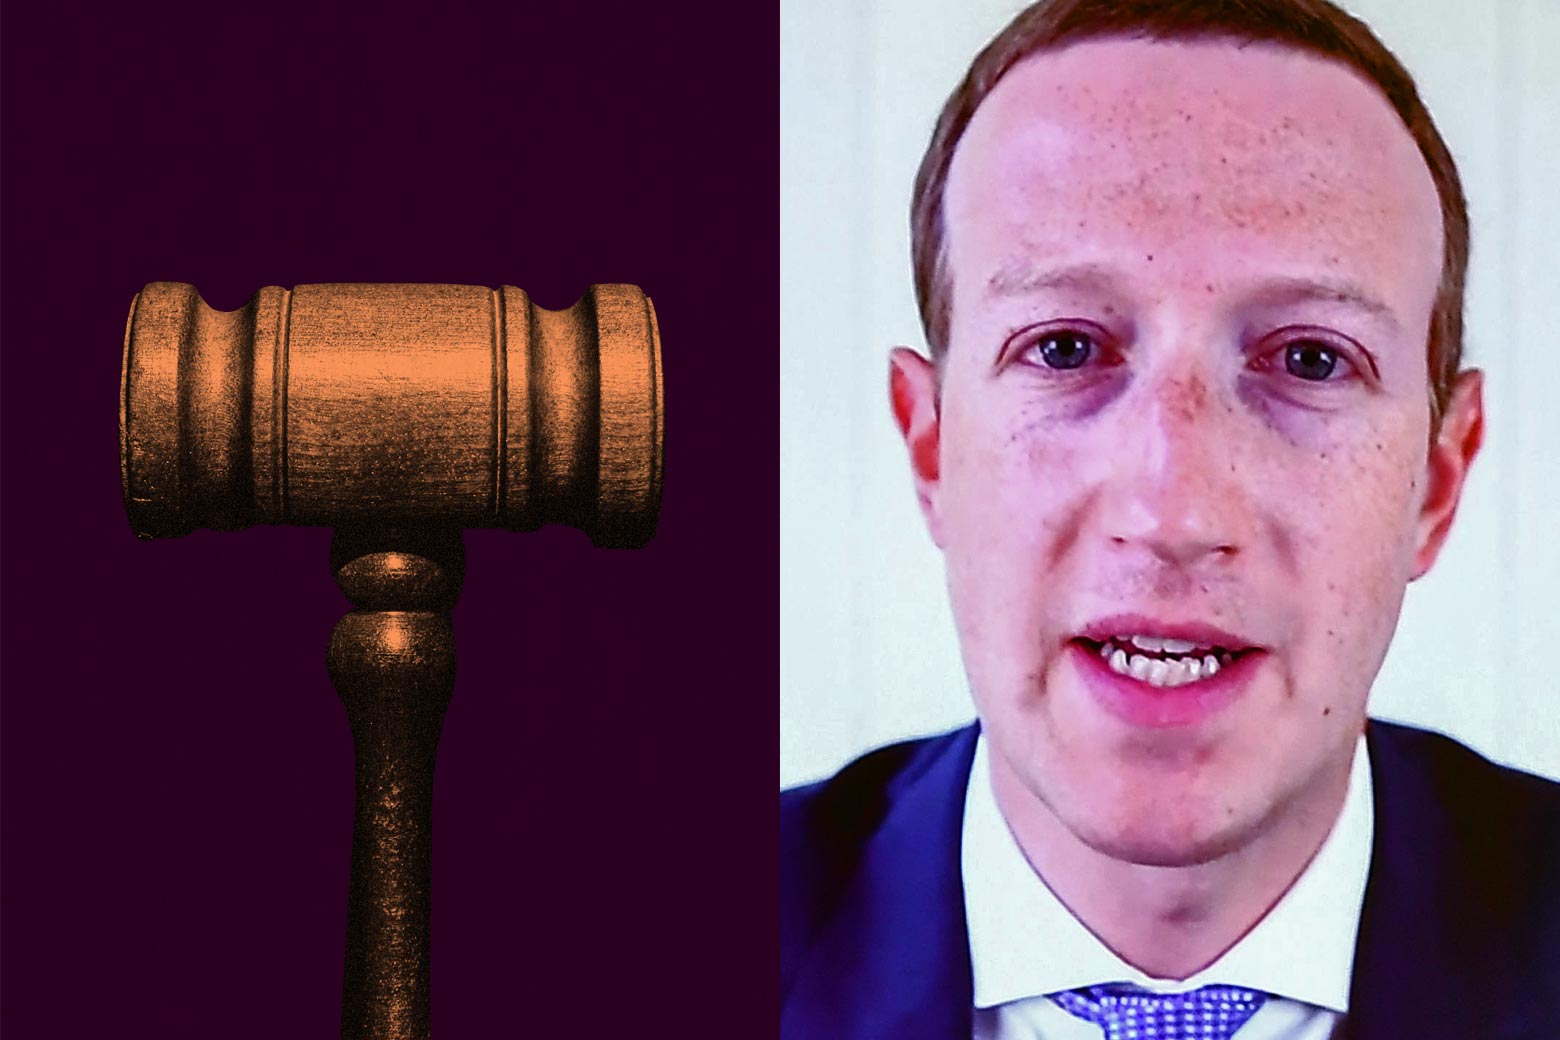 On the left, a gavel; on the right, a close-up of Mark Zuckerberg.